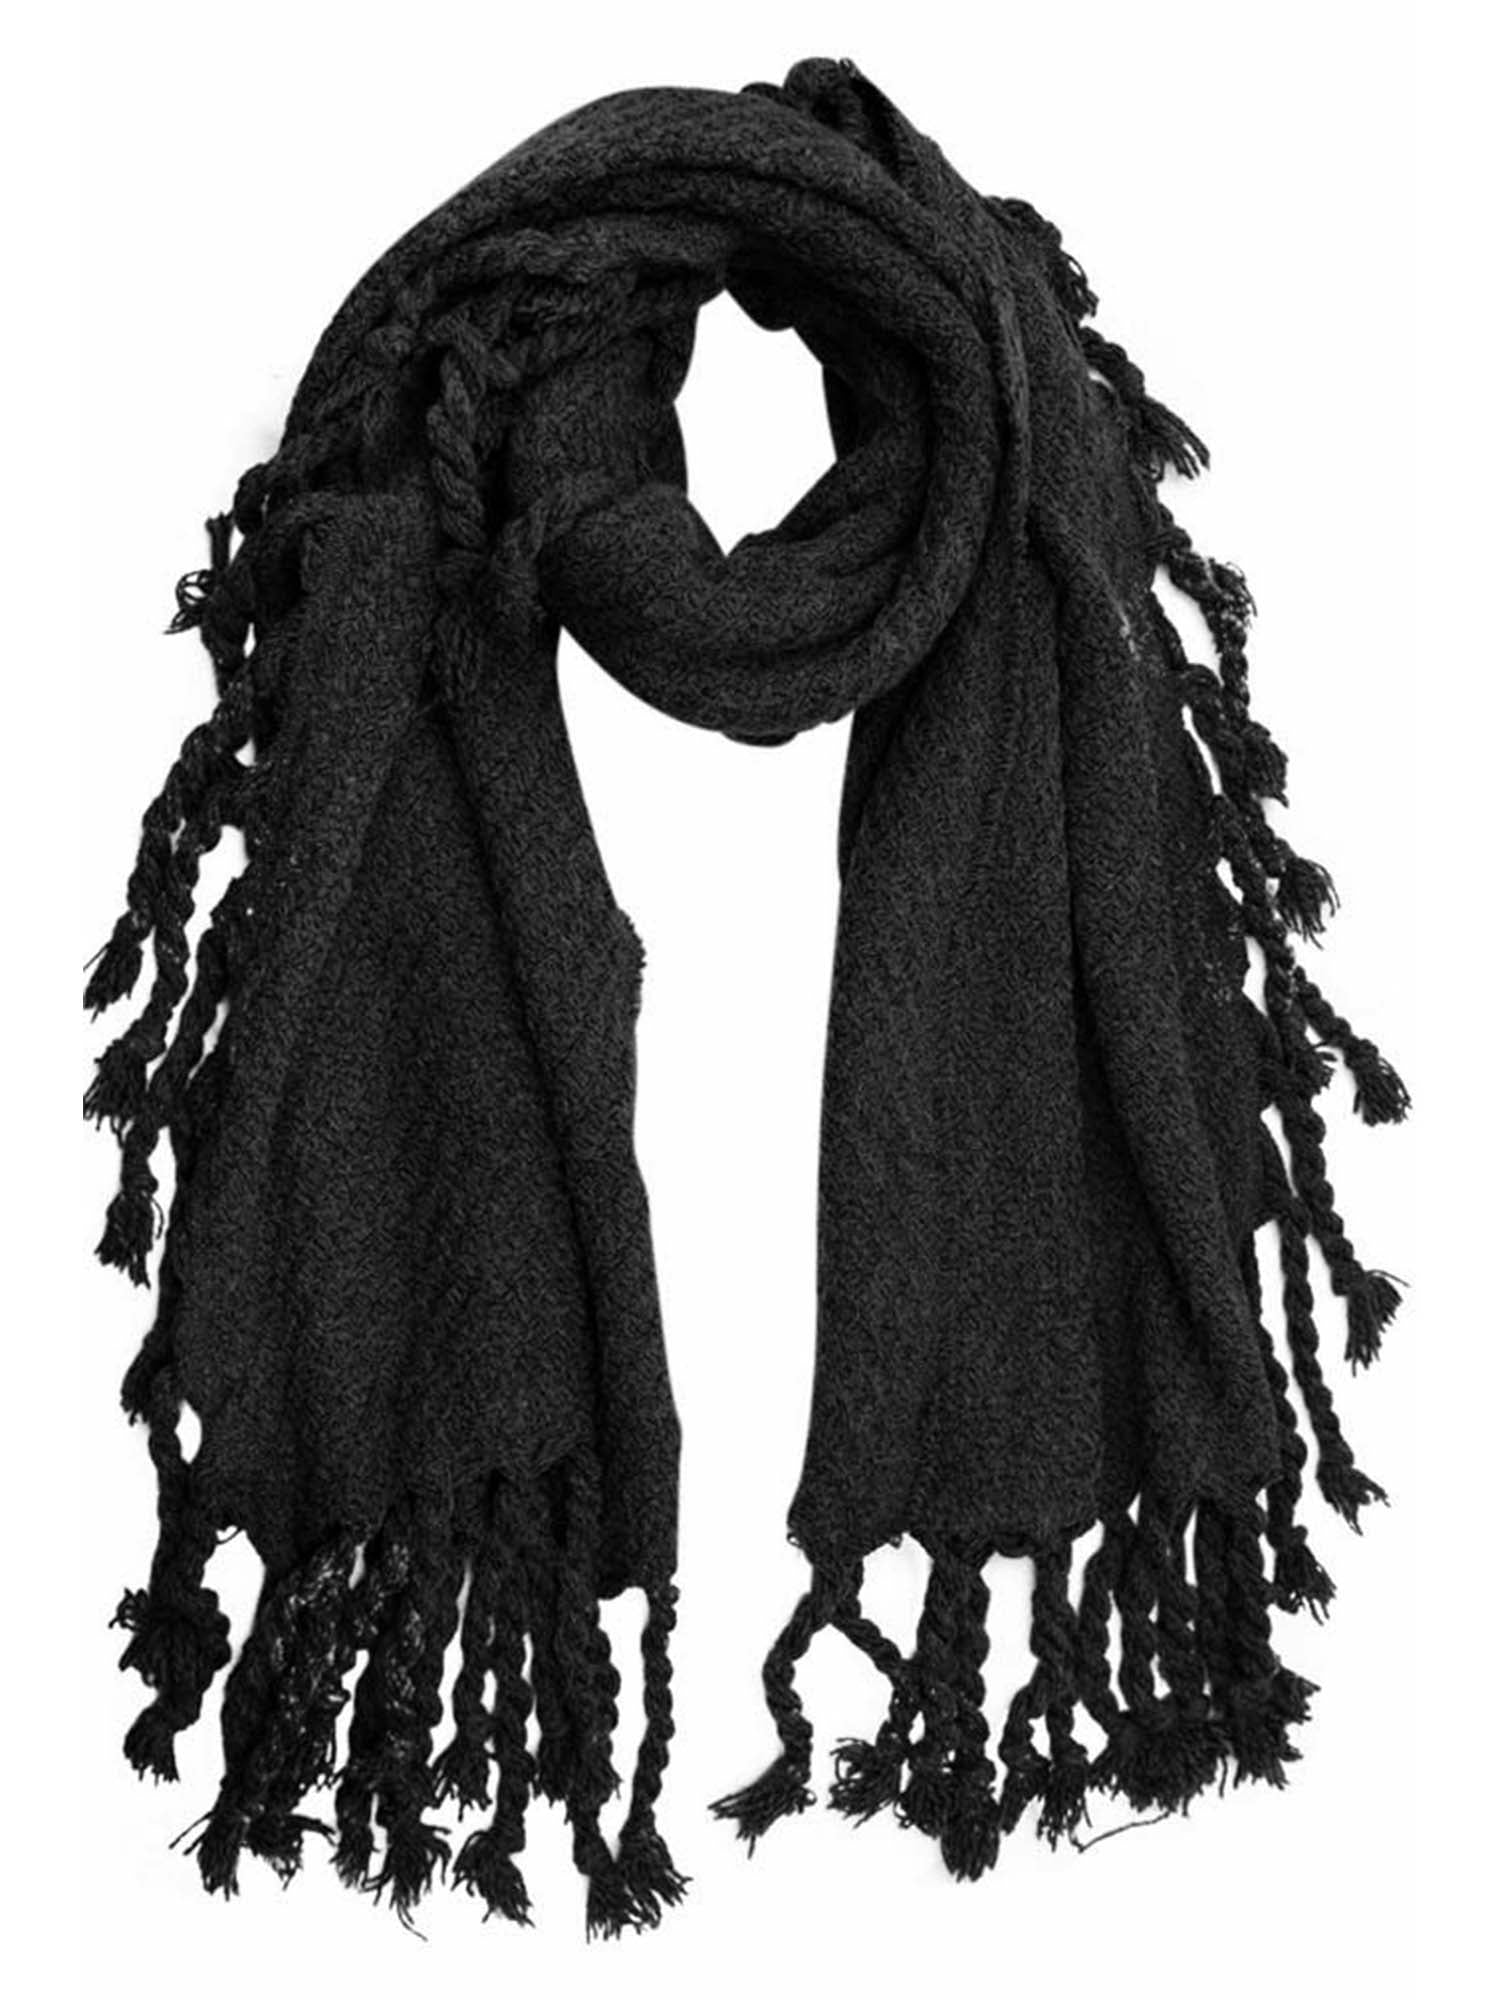 Loom knit, chunky, extra warm, black and white, trendy scarf.